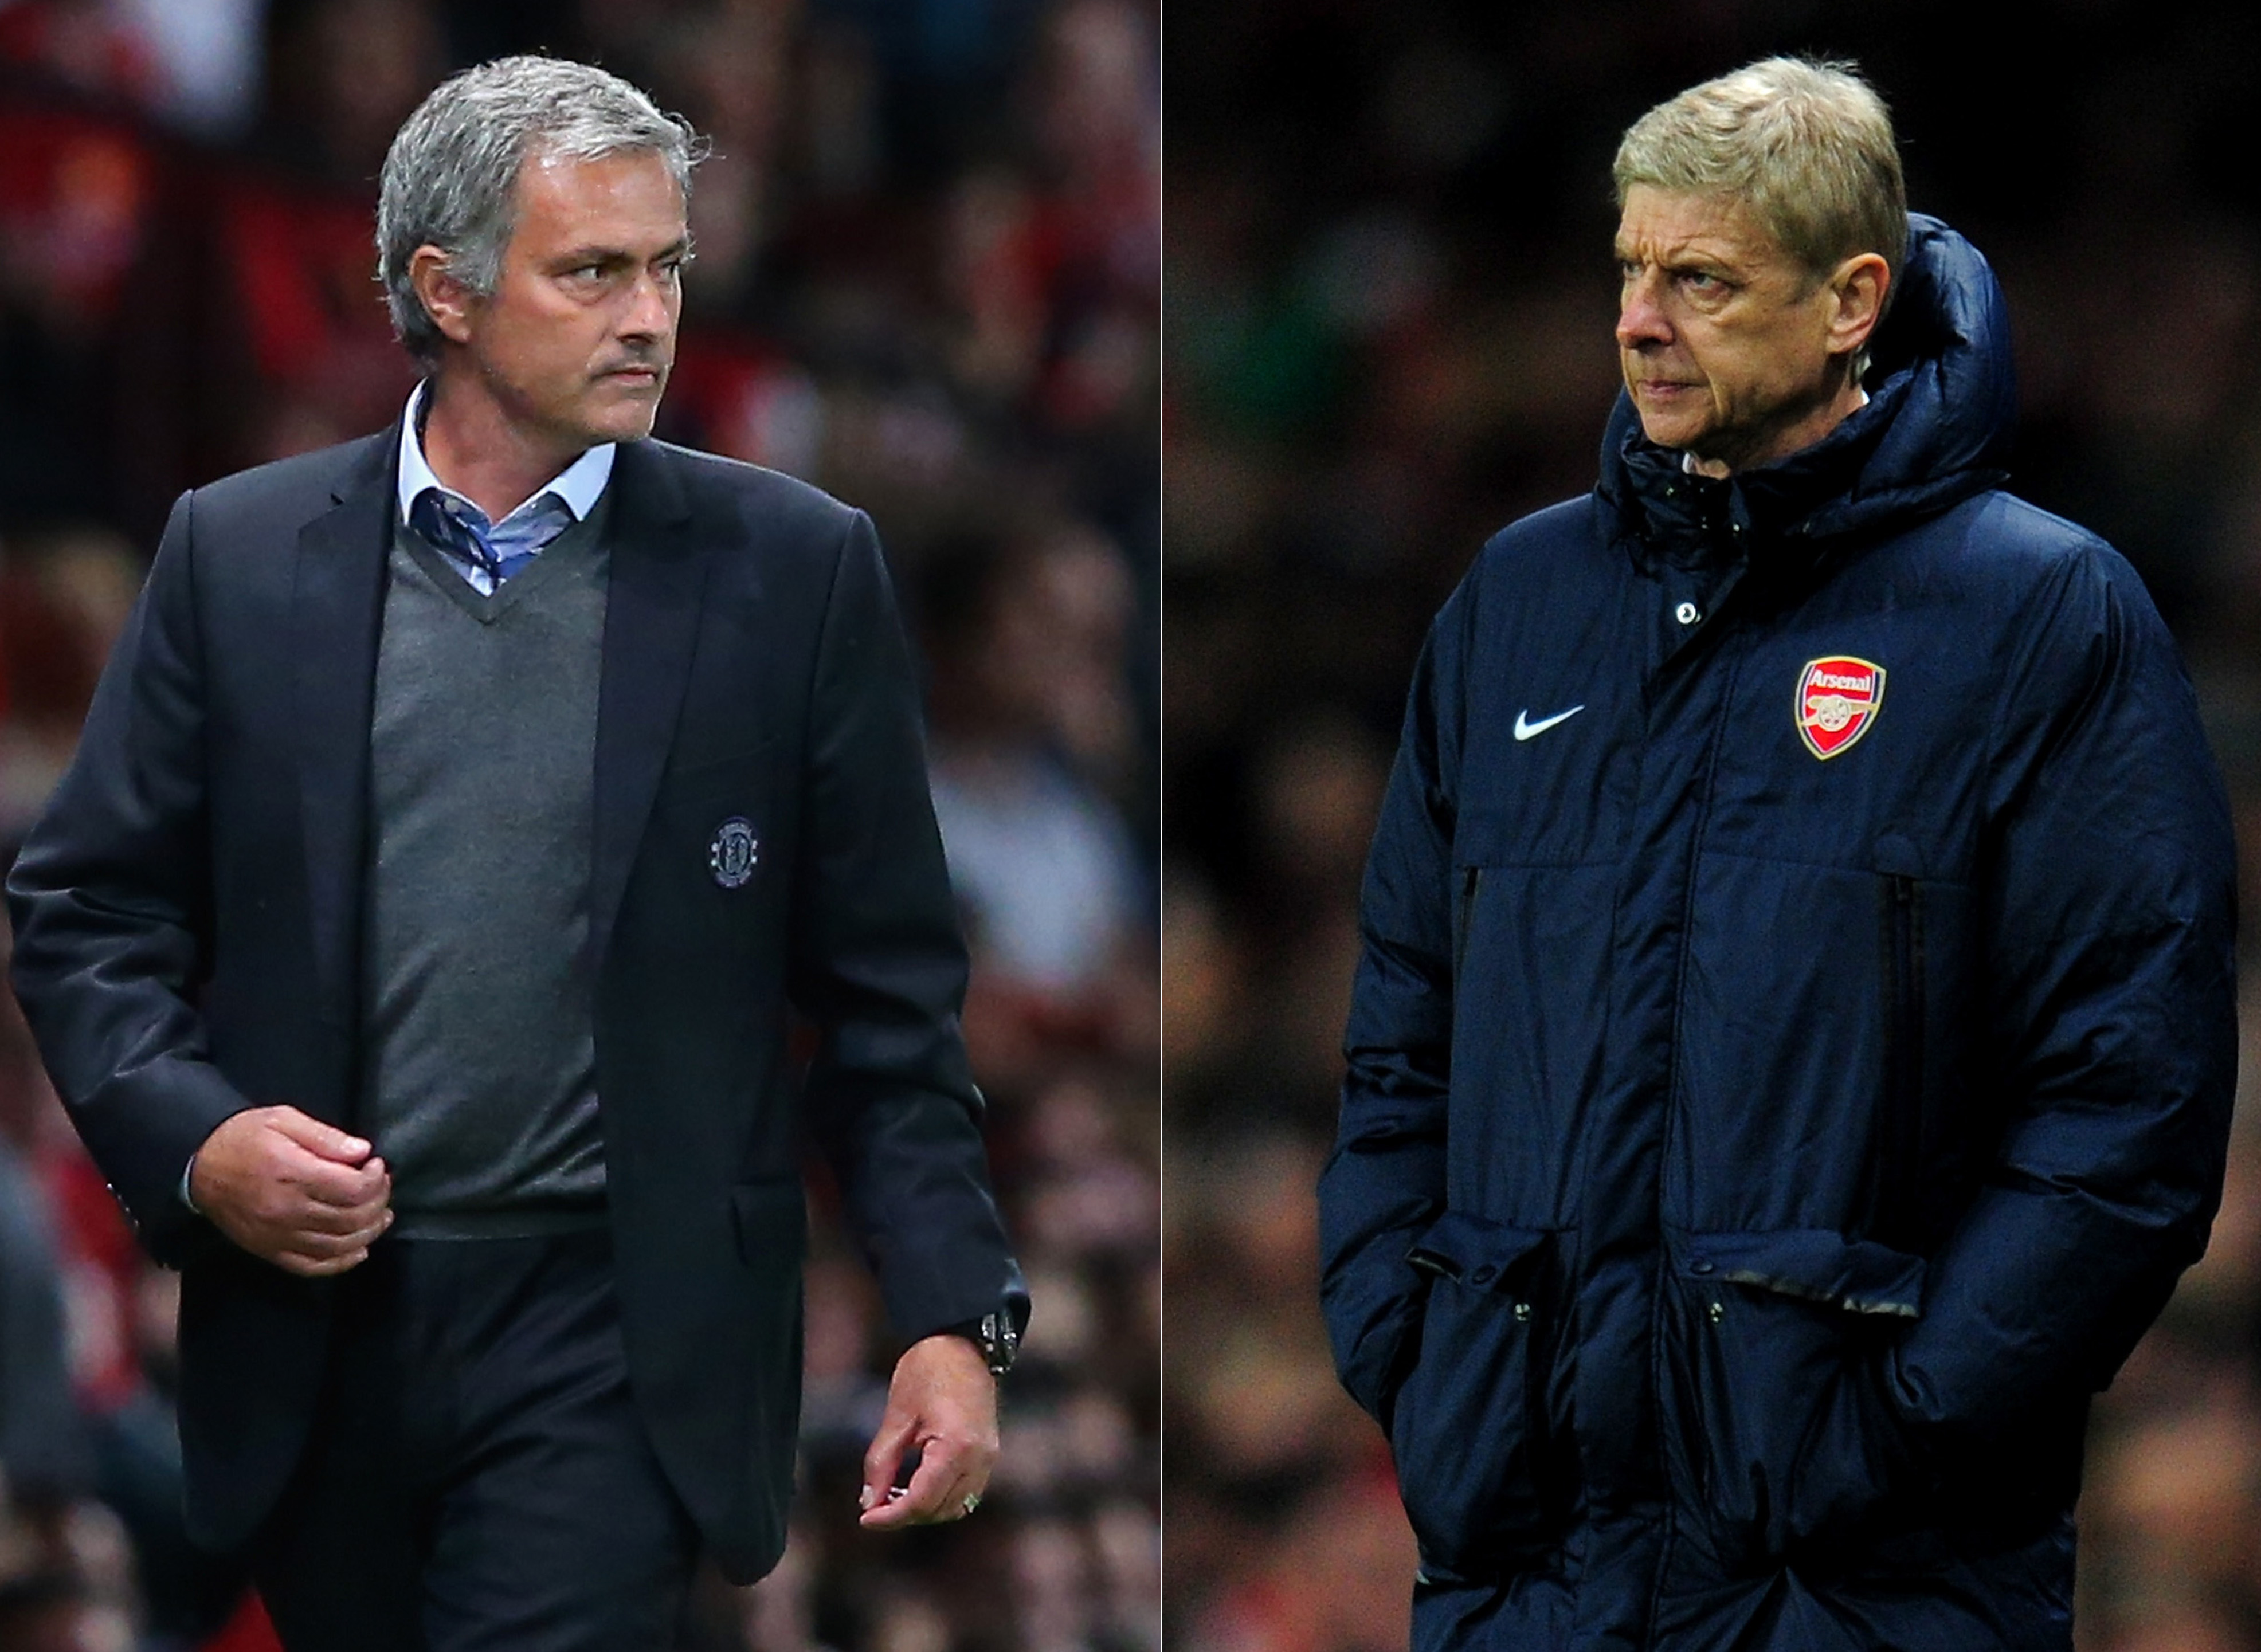 (FILE PHOTO - EDITORS NOTE: COMPOSITE OF TWO IMAGES - Image Numbers 177996036 (L) and 452339145) In this composite image a comparison has been made between Chelsea Manager Jose Mourinho (L) and Arsenal Manager Arsene Wenger. The Premier League match between Arsenal and Chelsea takes place on December 23, 2013 at the Emirates Stadium, London, England. ***LEFT IMAGE*** MANCHESTER, ENGLAND - AUGUST 26: Chelsea Manager Jose Mourinho looks on during the Barclays Premier League match between Manchester United and Chelsea at Old Trafford on August 26, 2013 in Manchester, England. (Photo by Alex Livesey/Getty Images) ***RIGHT IMAGE*** LONDON, ENGLAND - NOVEMBER 26: Manager Arsene Wenger of Arsenal looks on during the UEFA Champions League Group F match between Arsenal and Olympique de Marseille at Emirates Stadium on November 26, 2013 in London, England. (Photo by Shaun Botterill/Getty Images)